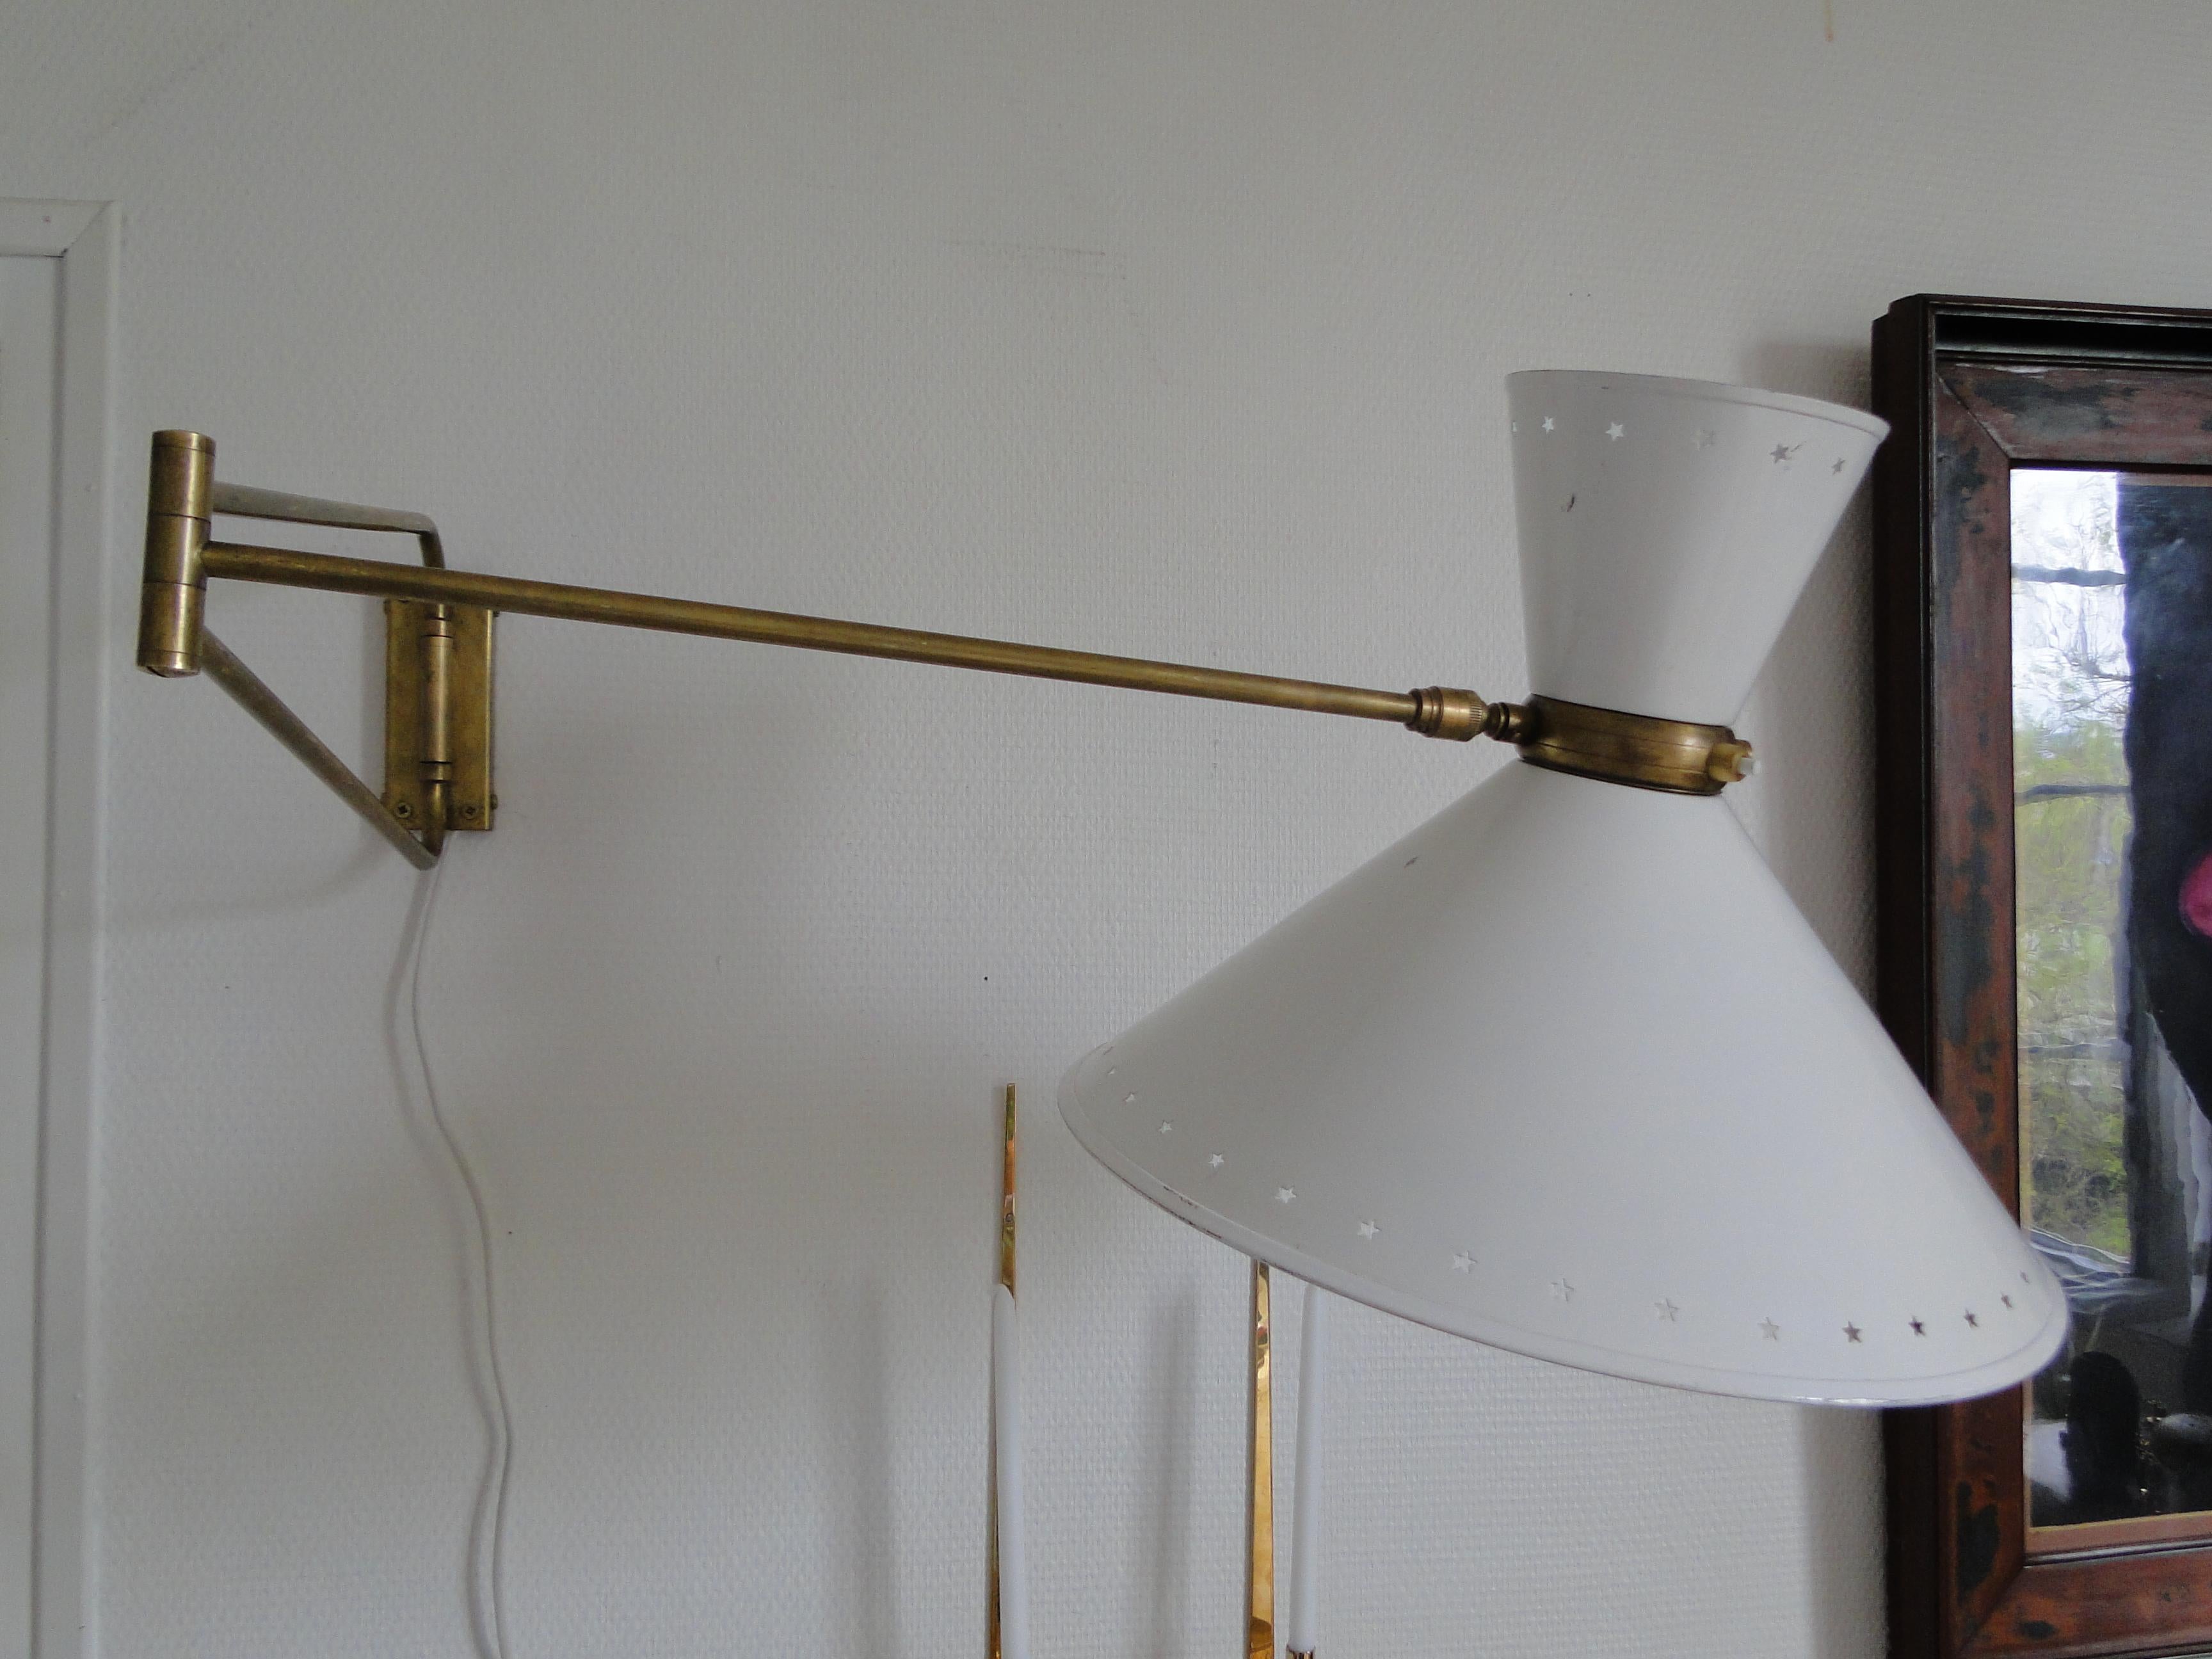 Vintage wall lamp by René Mathieu 1950 France.

Wall light by René Mathieu from the 1950s.

2-Arm articulated metal and brass stem.

Aluminum lampshades 12 and 35 cm in diameter.

Length about 105 cm.